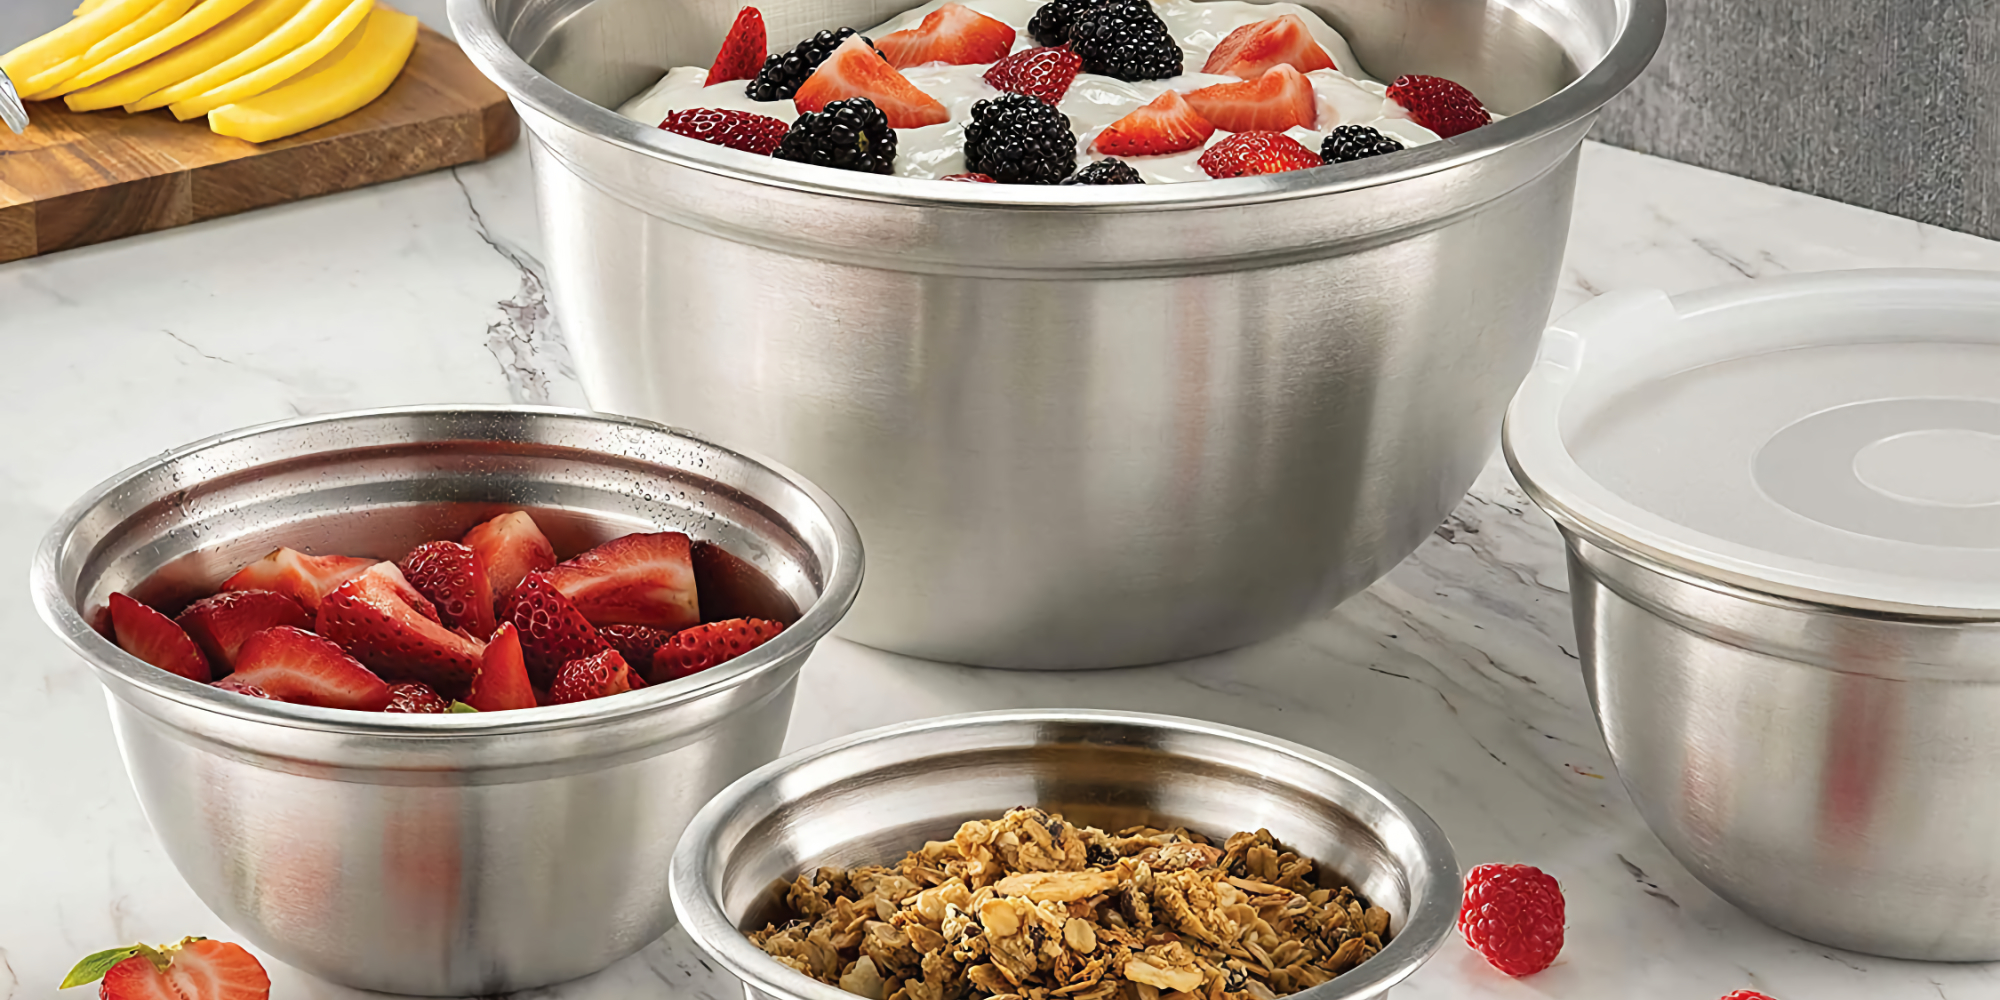 https://9to5toys.com/wp-content/uploads/sites/5/2021/08/FineDine-5-piece-Stainless-Steel-Mixing-Bowl-Set.jpg